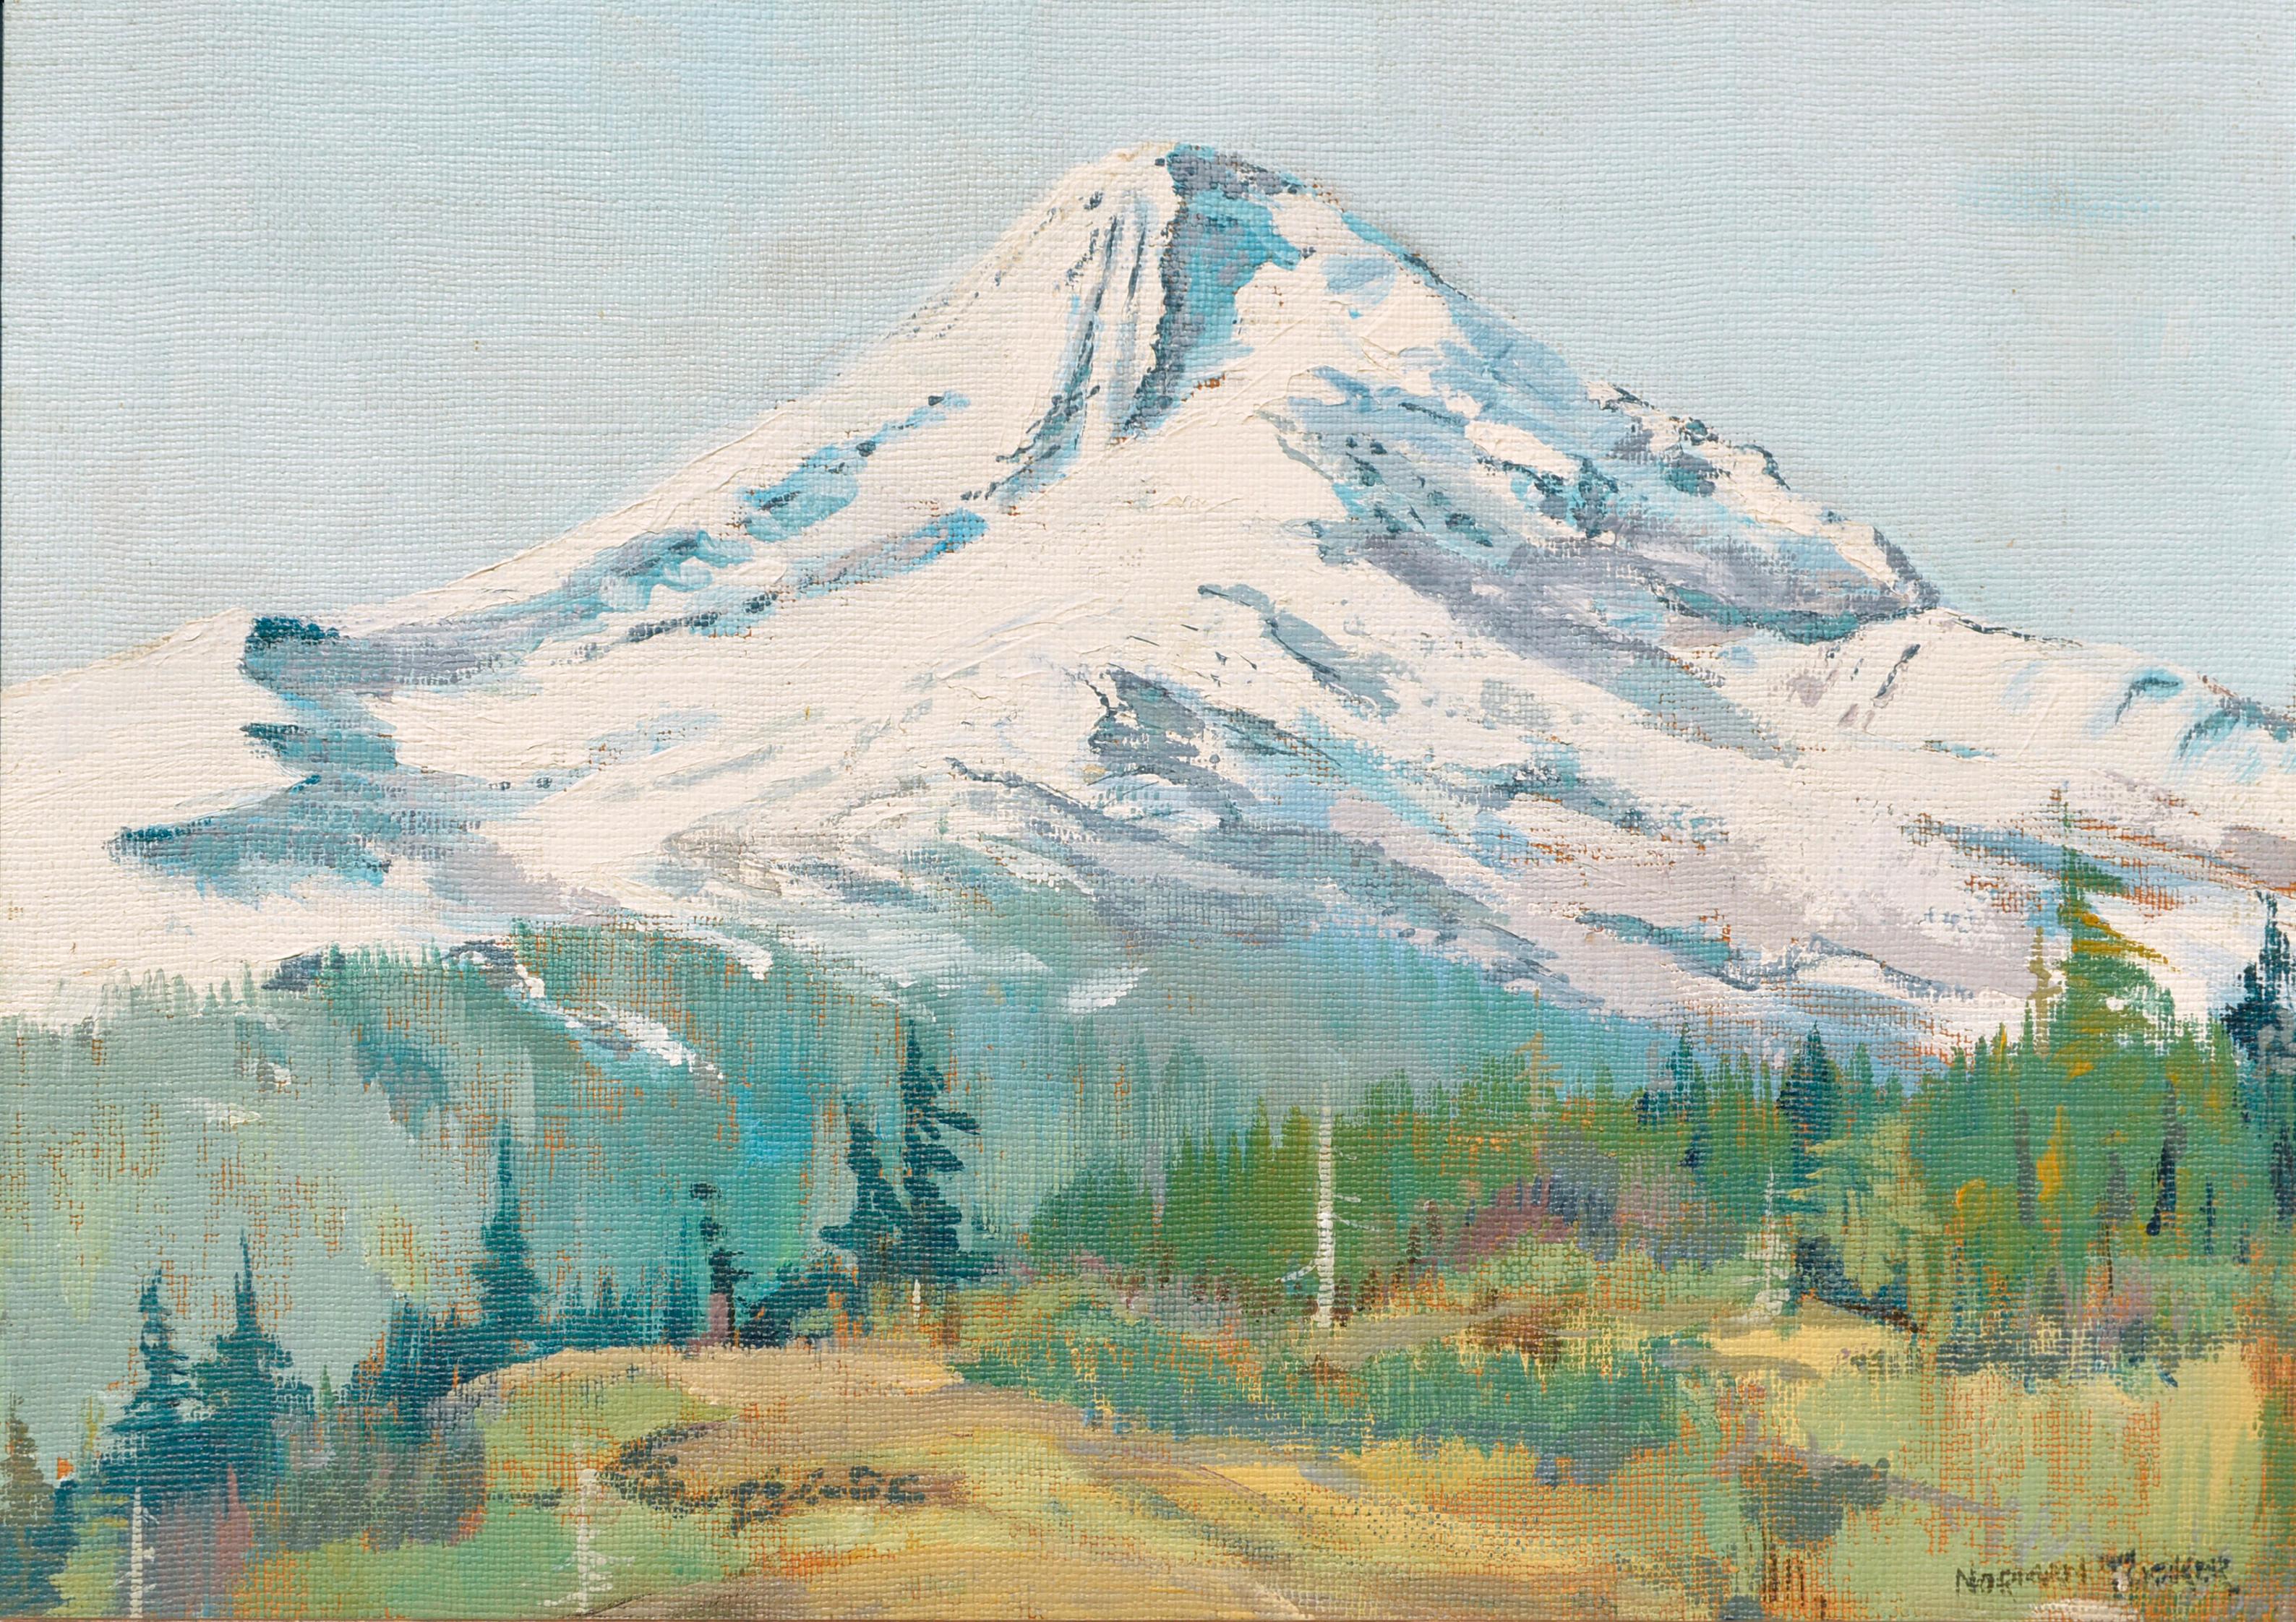 Mt. Hood in Winter - Painting by Unknown